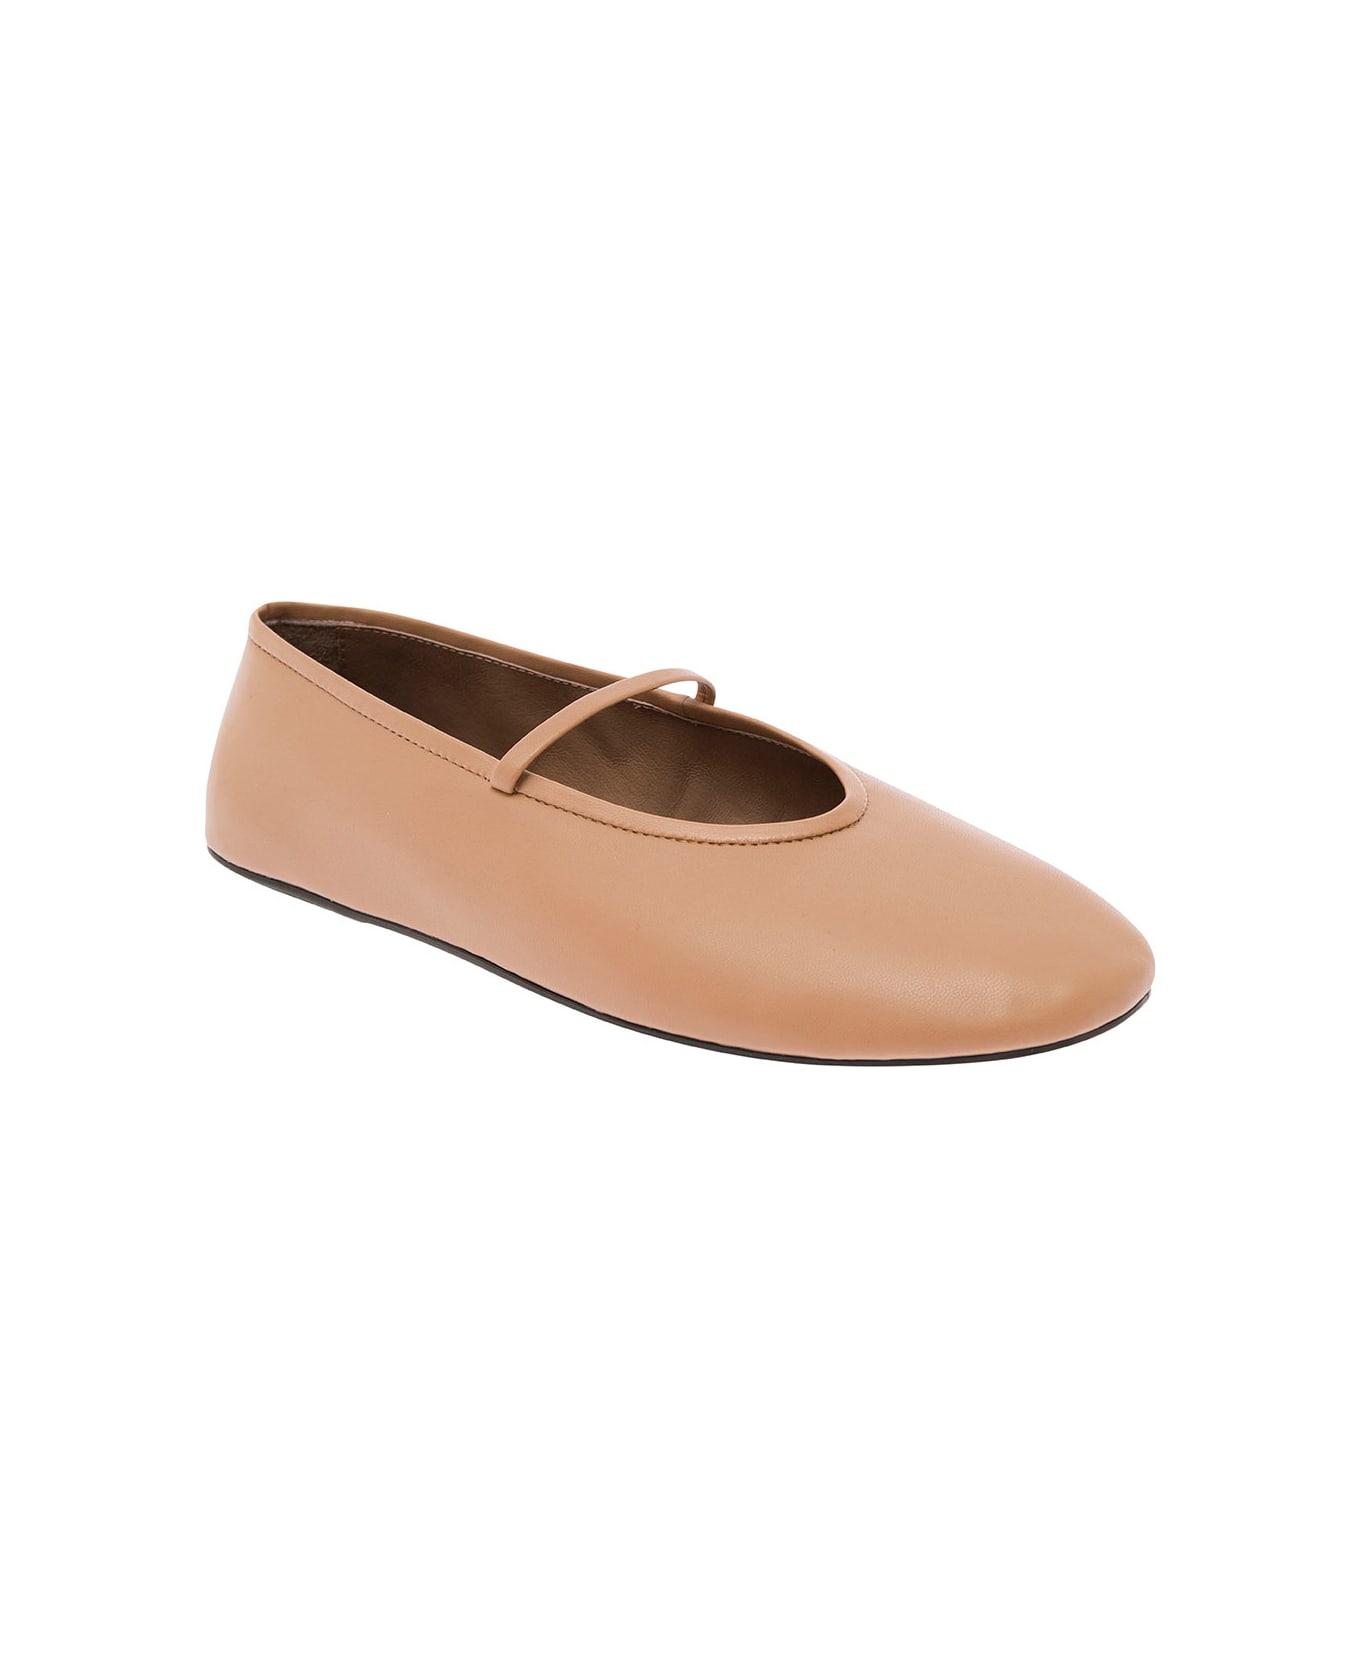 Jeffrey Campbell Beige Ballet Flats With Almond Toe In Eco Leather Woman - Beige フラットシューズ